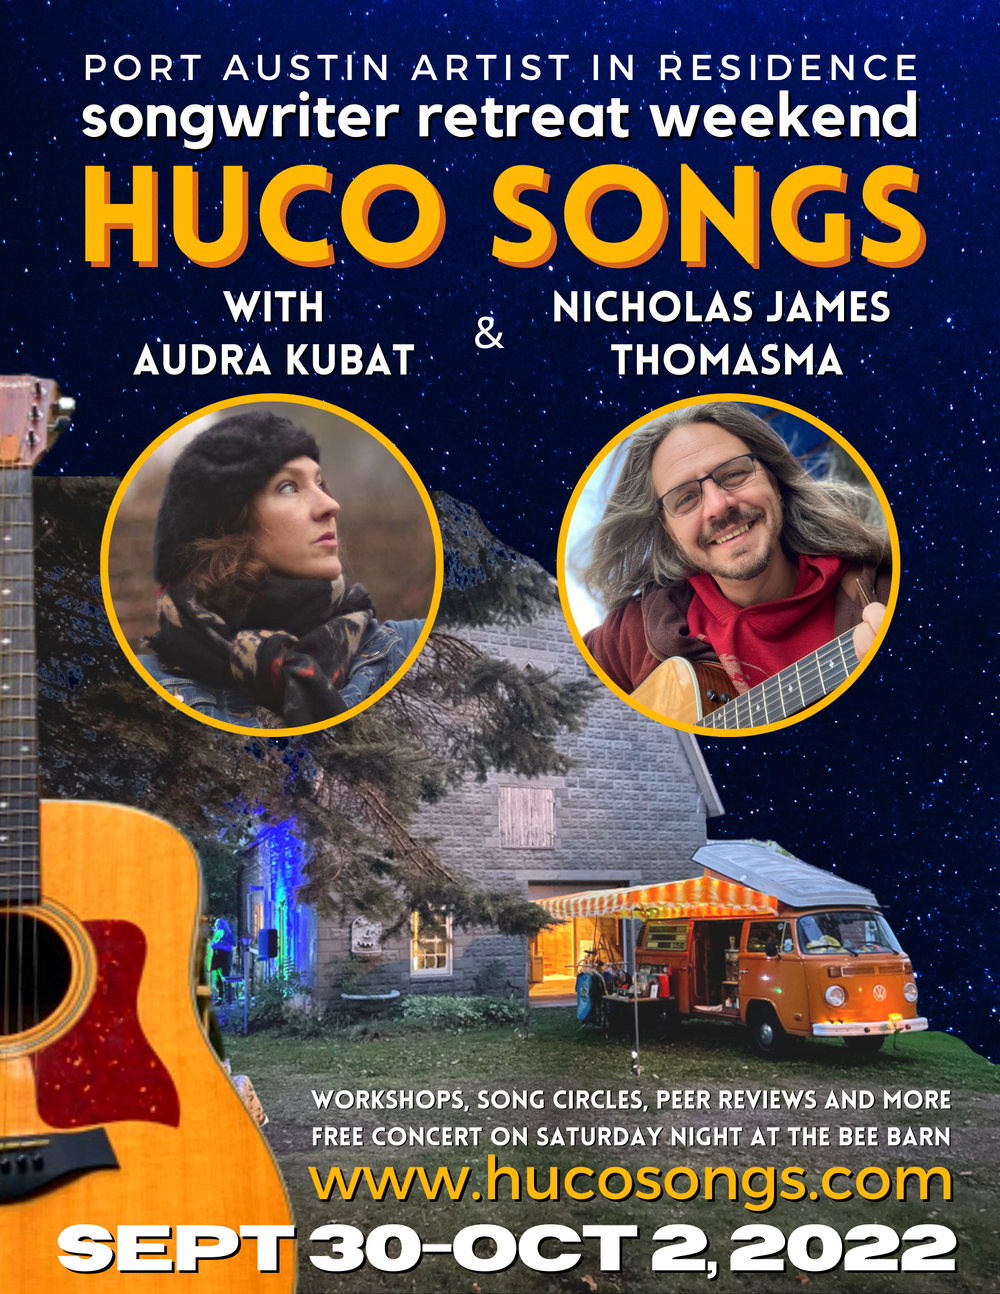 Registration is open now! Click on the photo to join us for Huco Songs Sept 30th-Oct2nd!